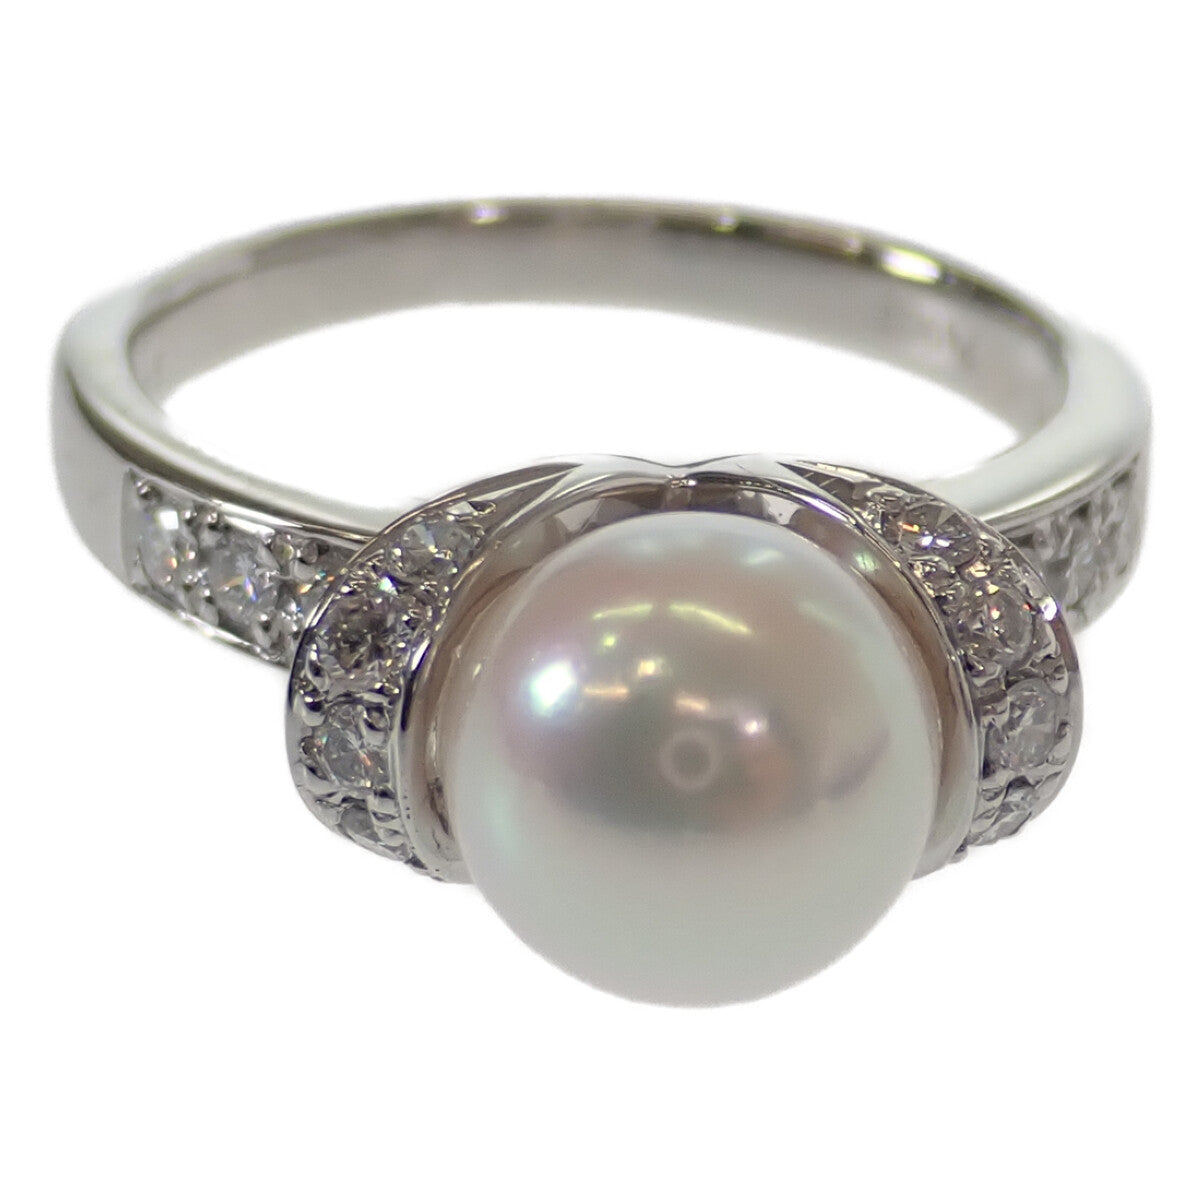 [LuxUness]  Platinum Pt900 Ring with Pearl about 8.0mm and Diamonds for Women in Excellent condition